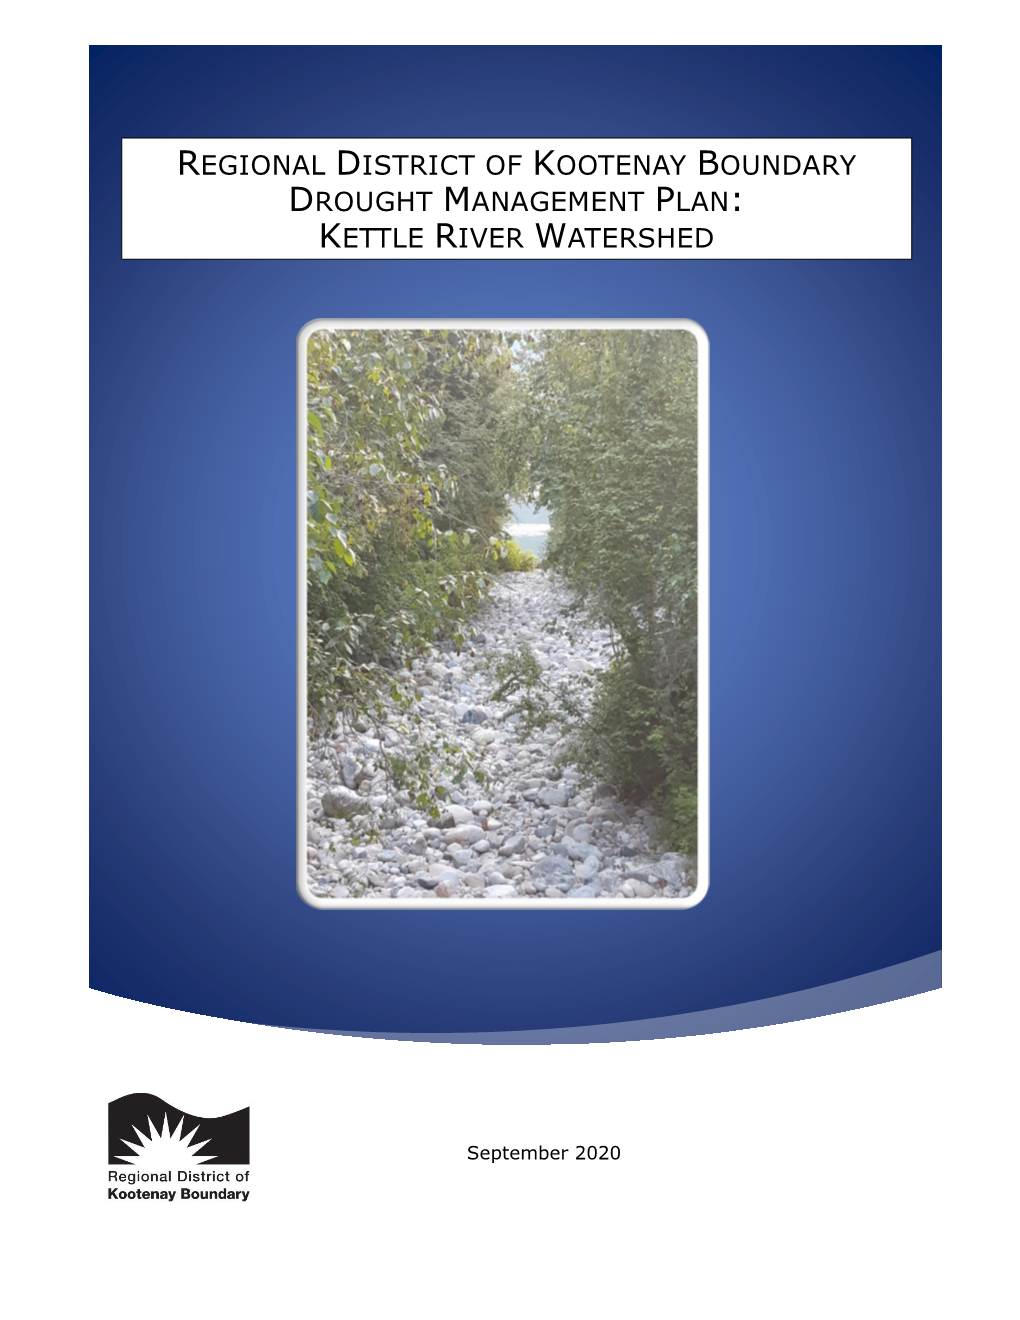 Regional District of Kootenay Boundary Drought Management Plan: Kettle River Watershed